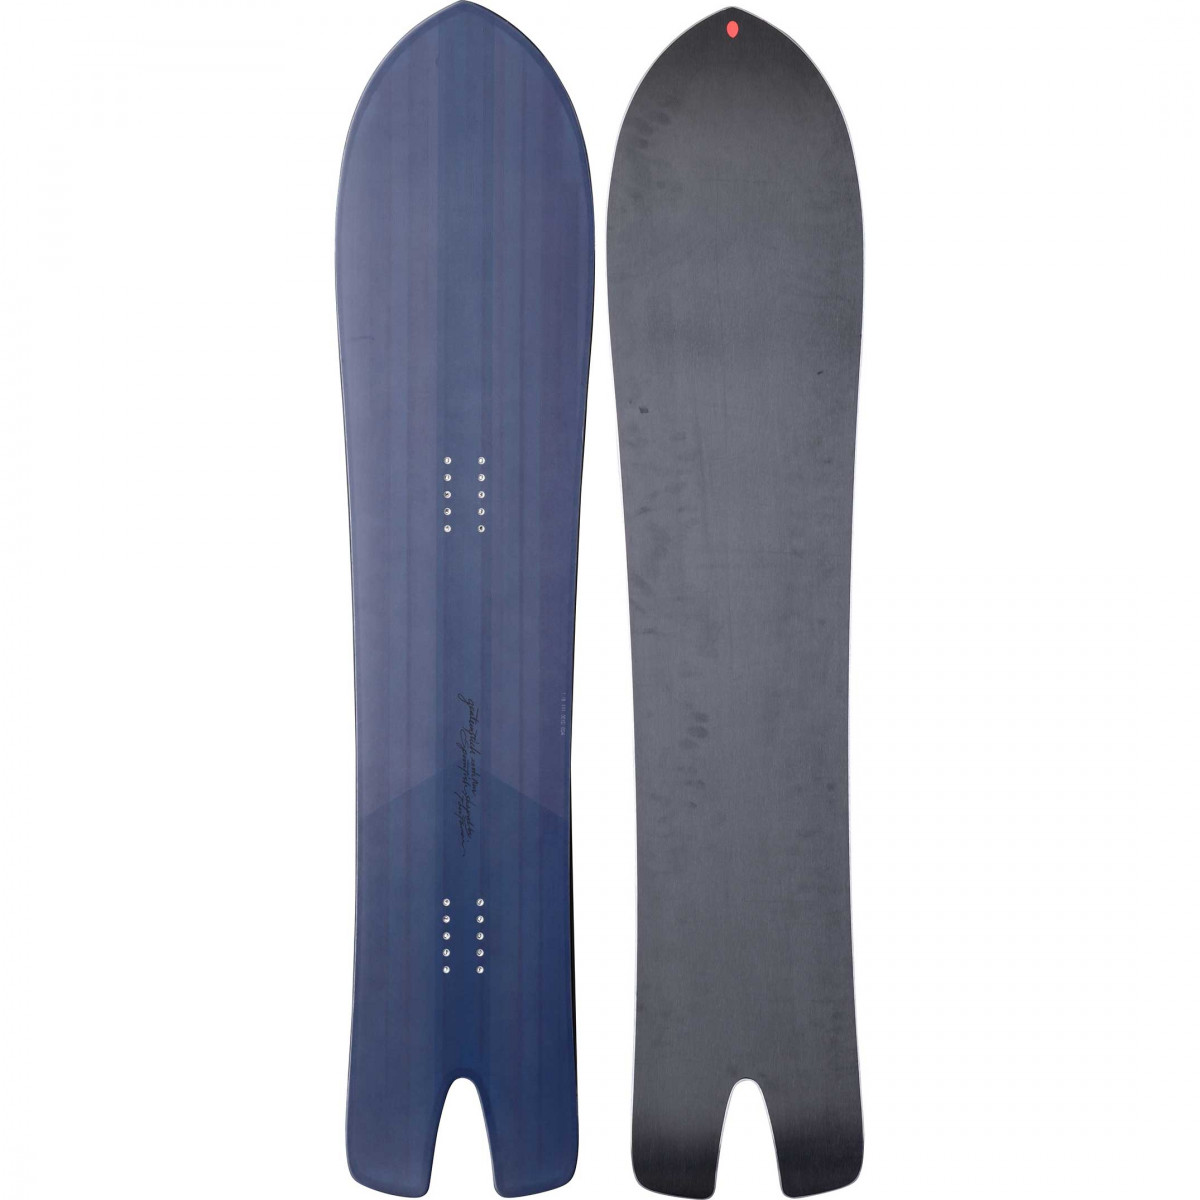 Gentemstick Spoonfish Snowboard Review - The Good Ride